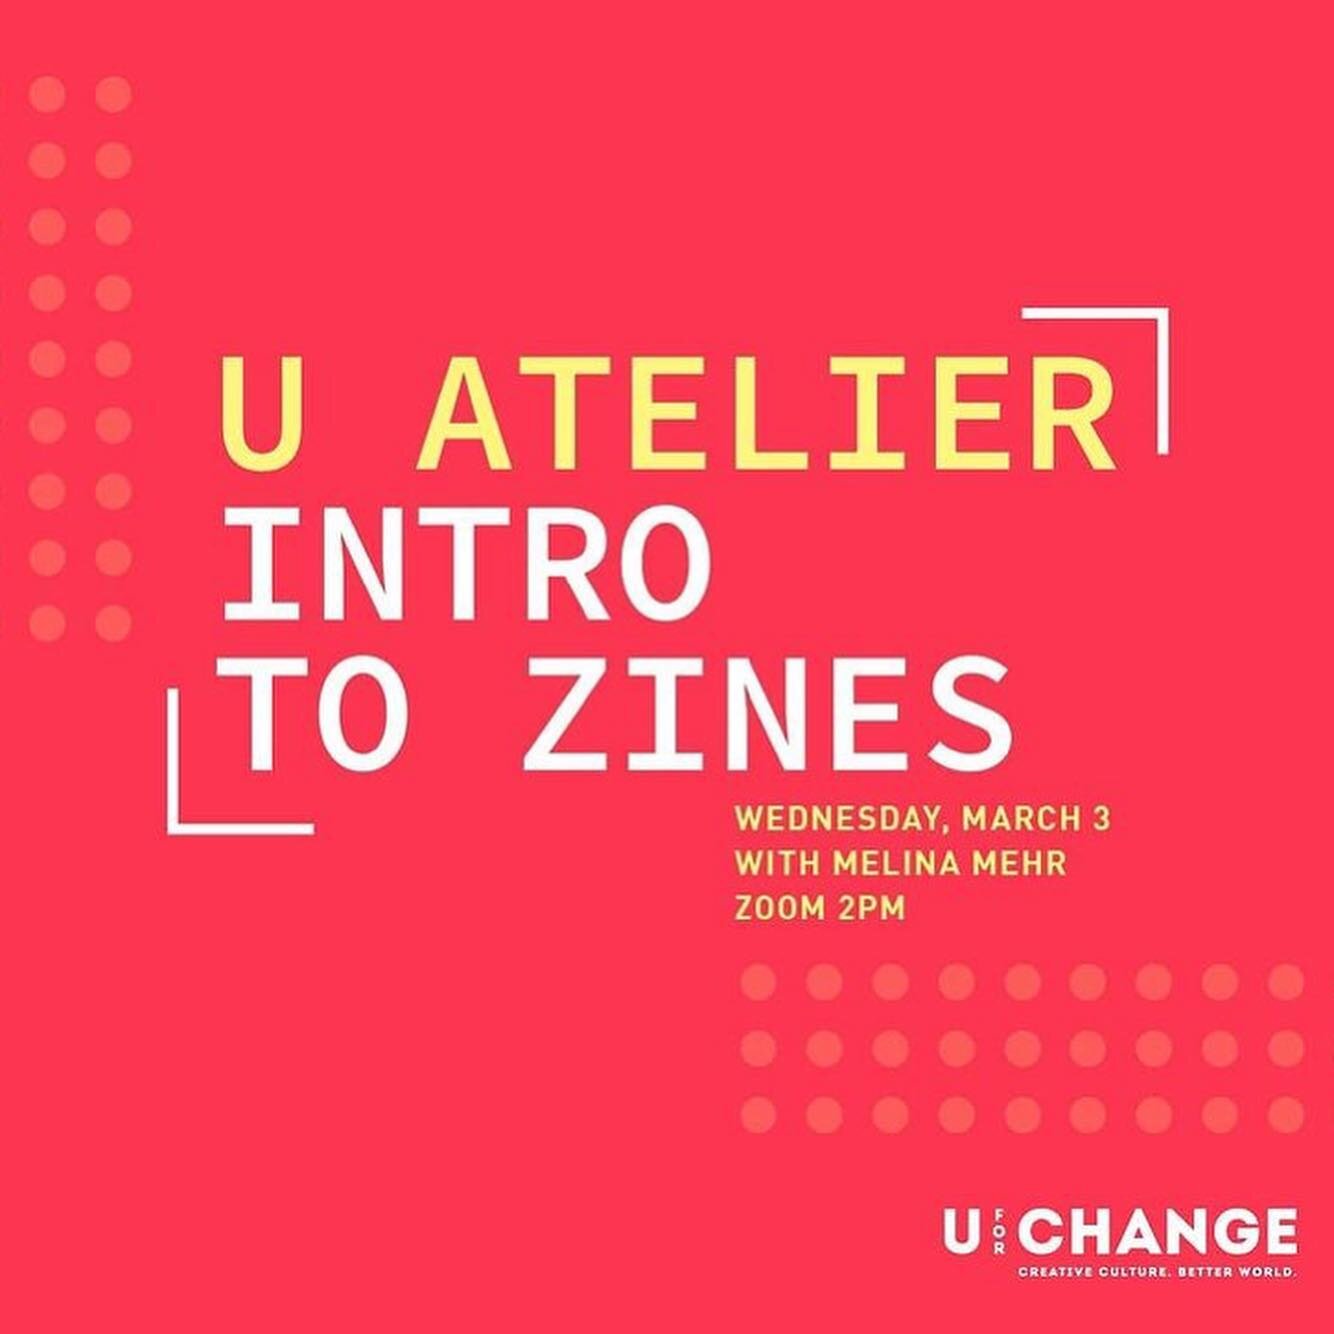 learn how to make a 🔖zine📏 *TODAY* with @invisibilitieszine founder, melina mehr @streetfog 

hosted by the wonderful youth arts program, @uforchange 

featuring food talks by our very own managing editor cherileigh, @chissmiss.cherry 🍒🤝

RSVP ⬆️